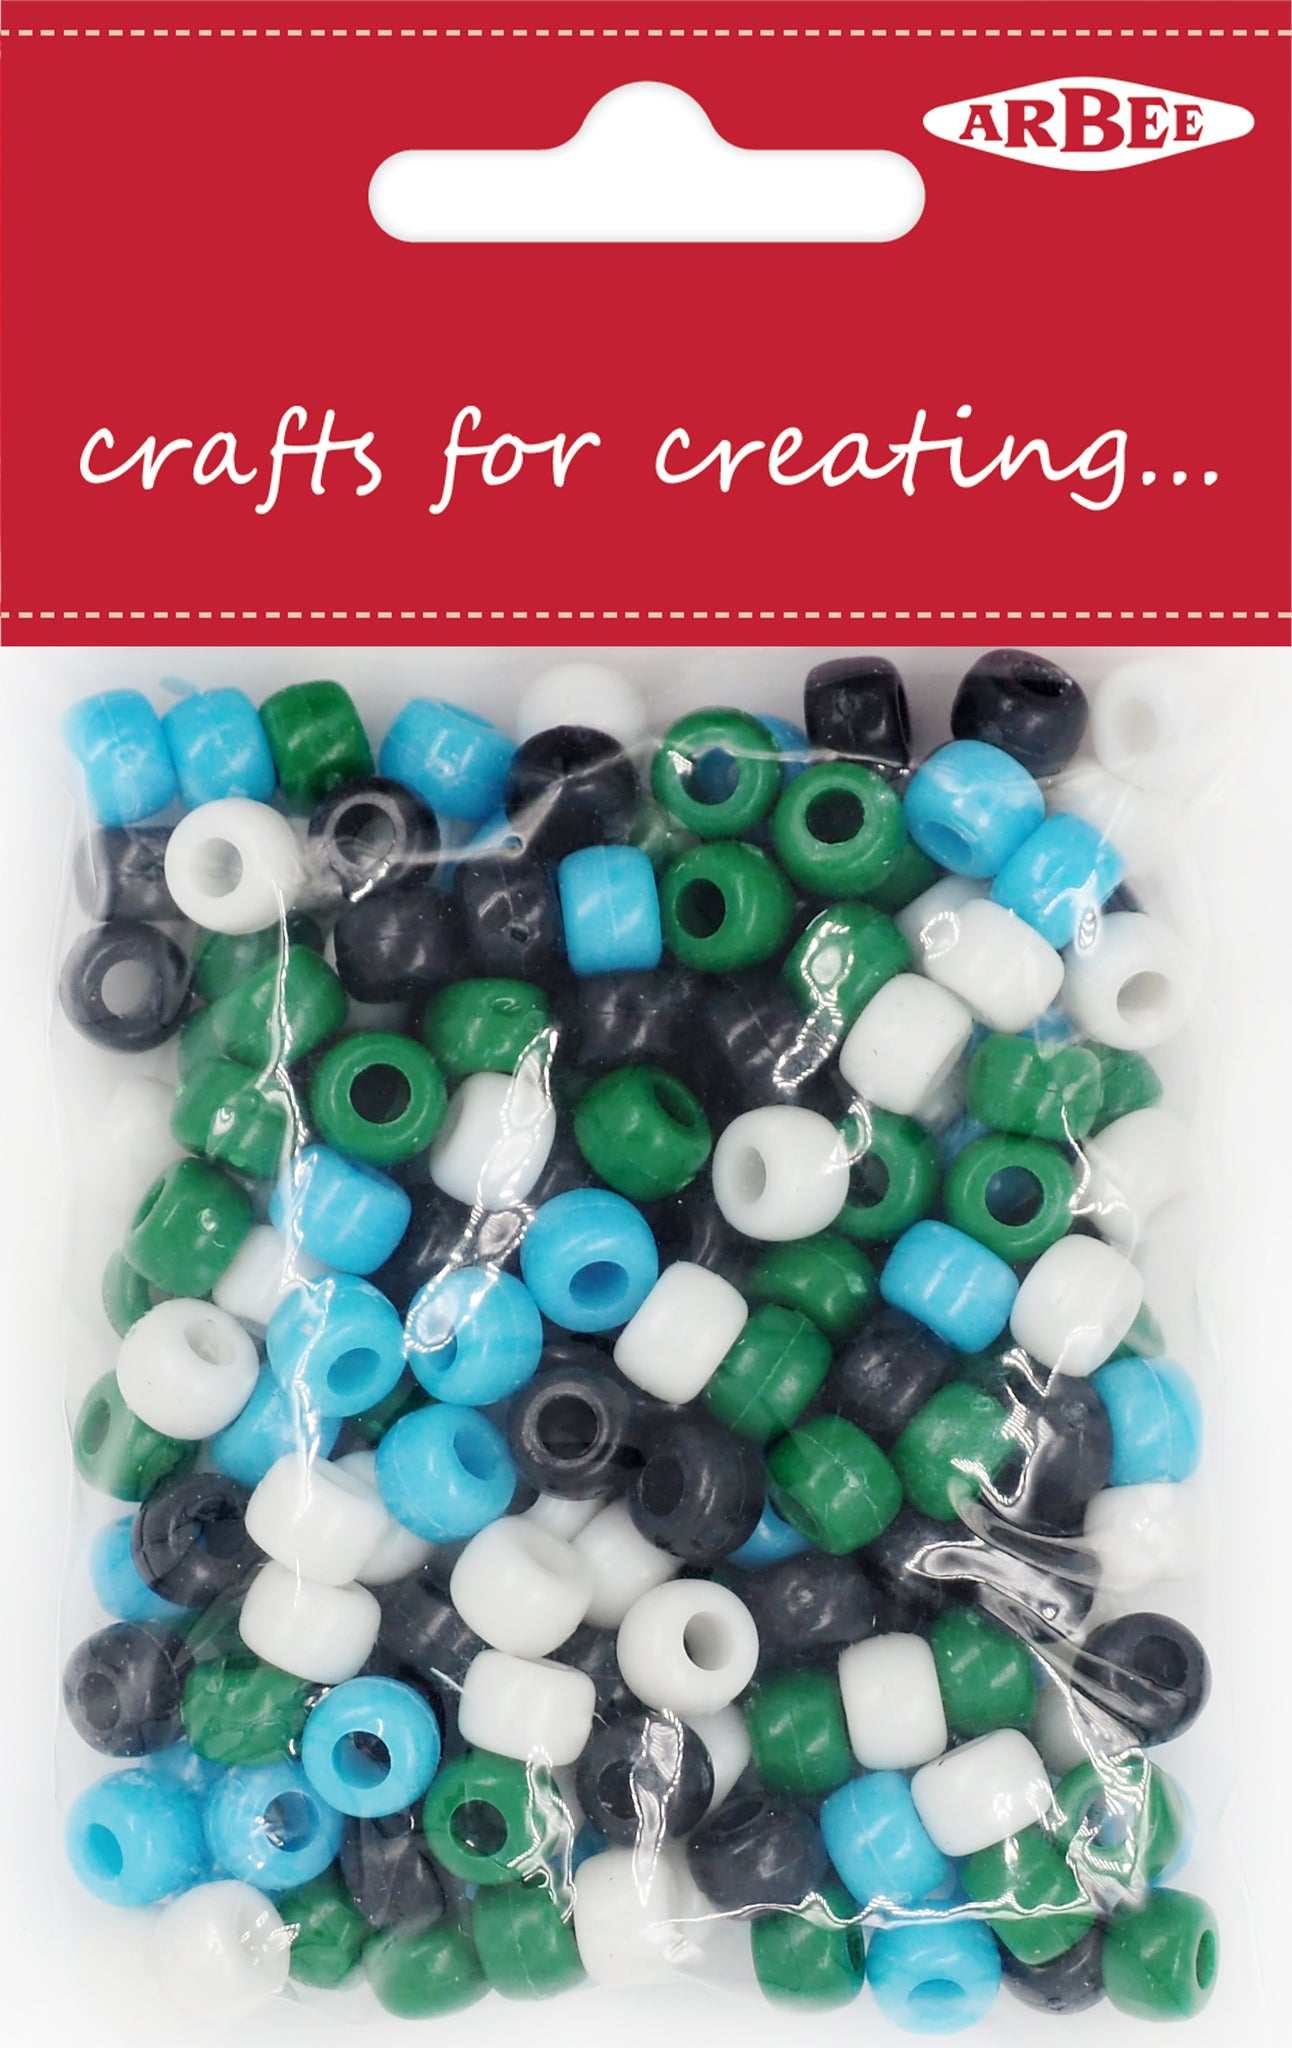 Bead Boxes and Packs - Arbee Craft